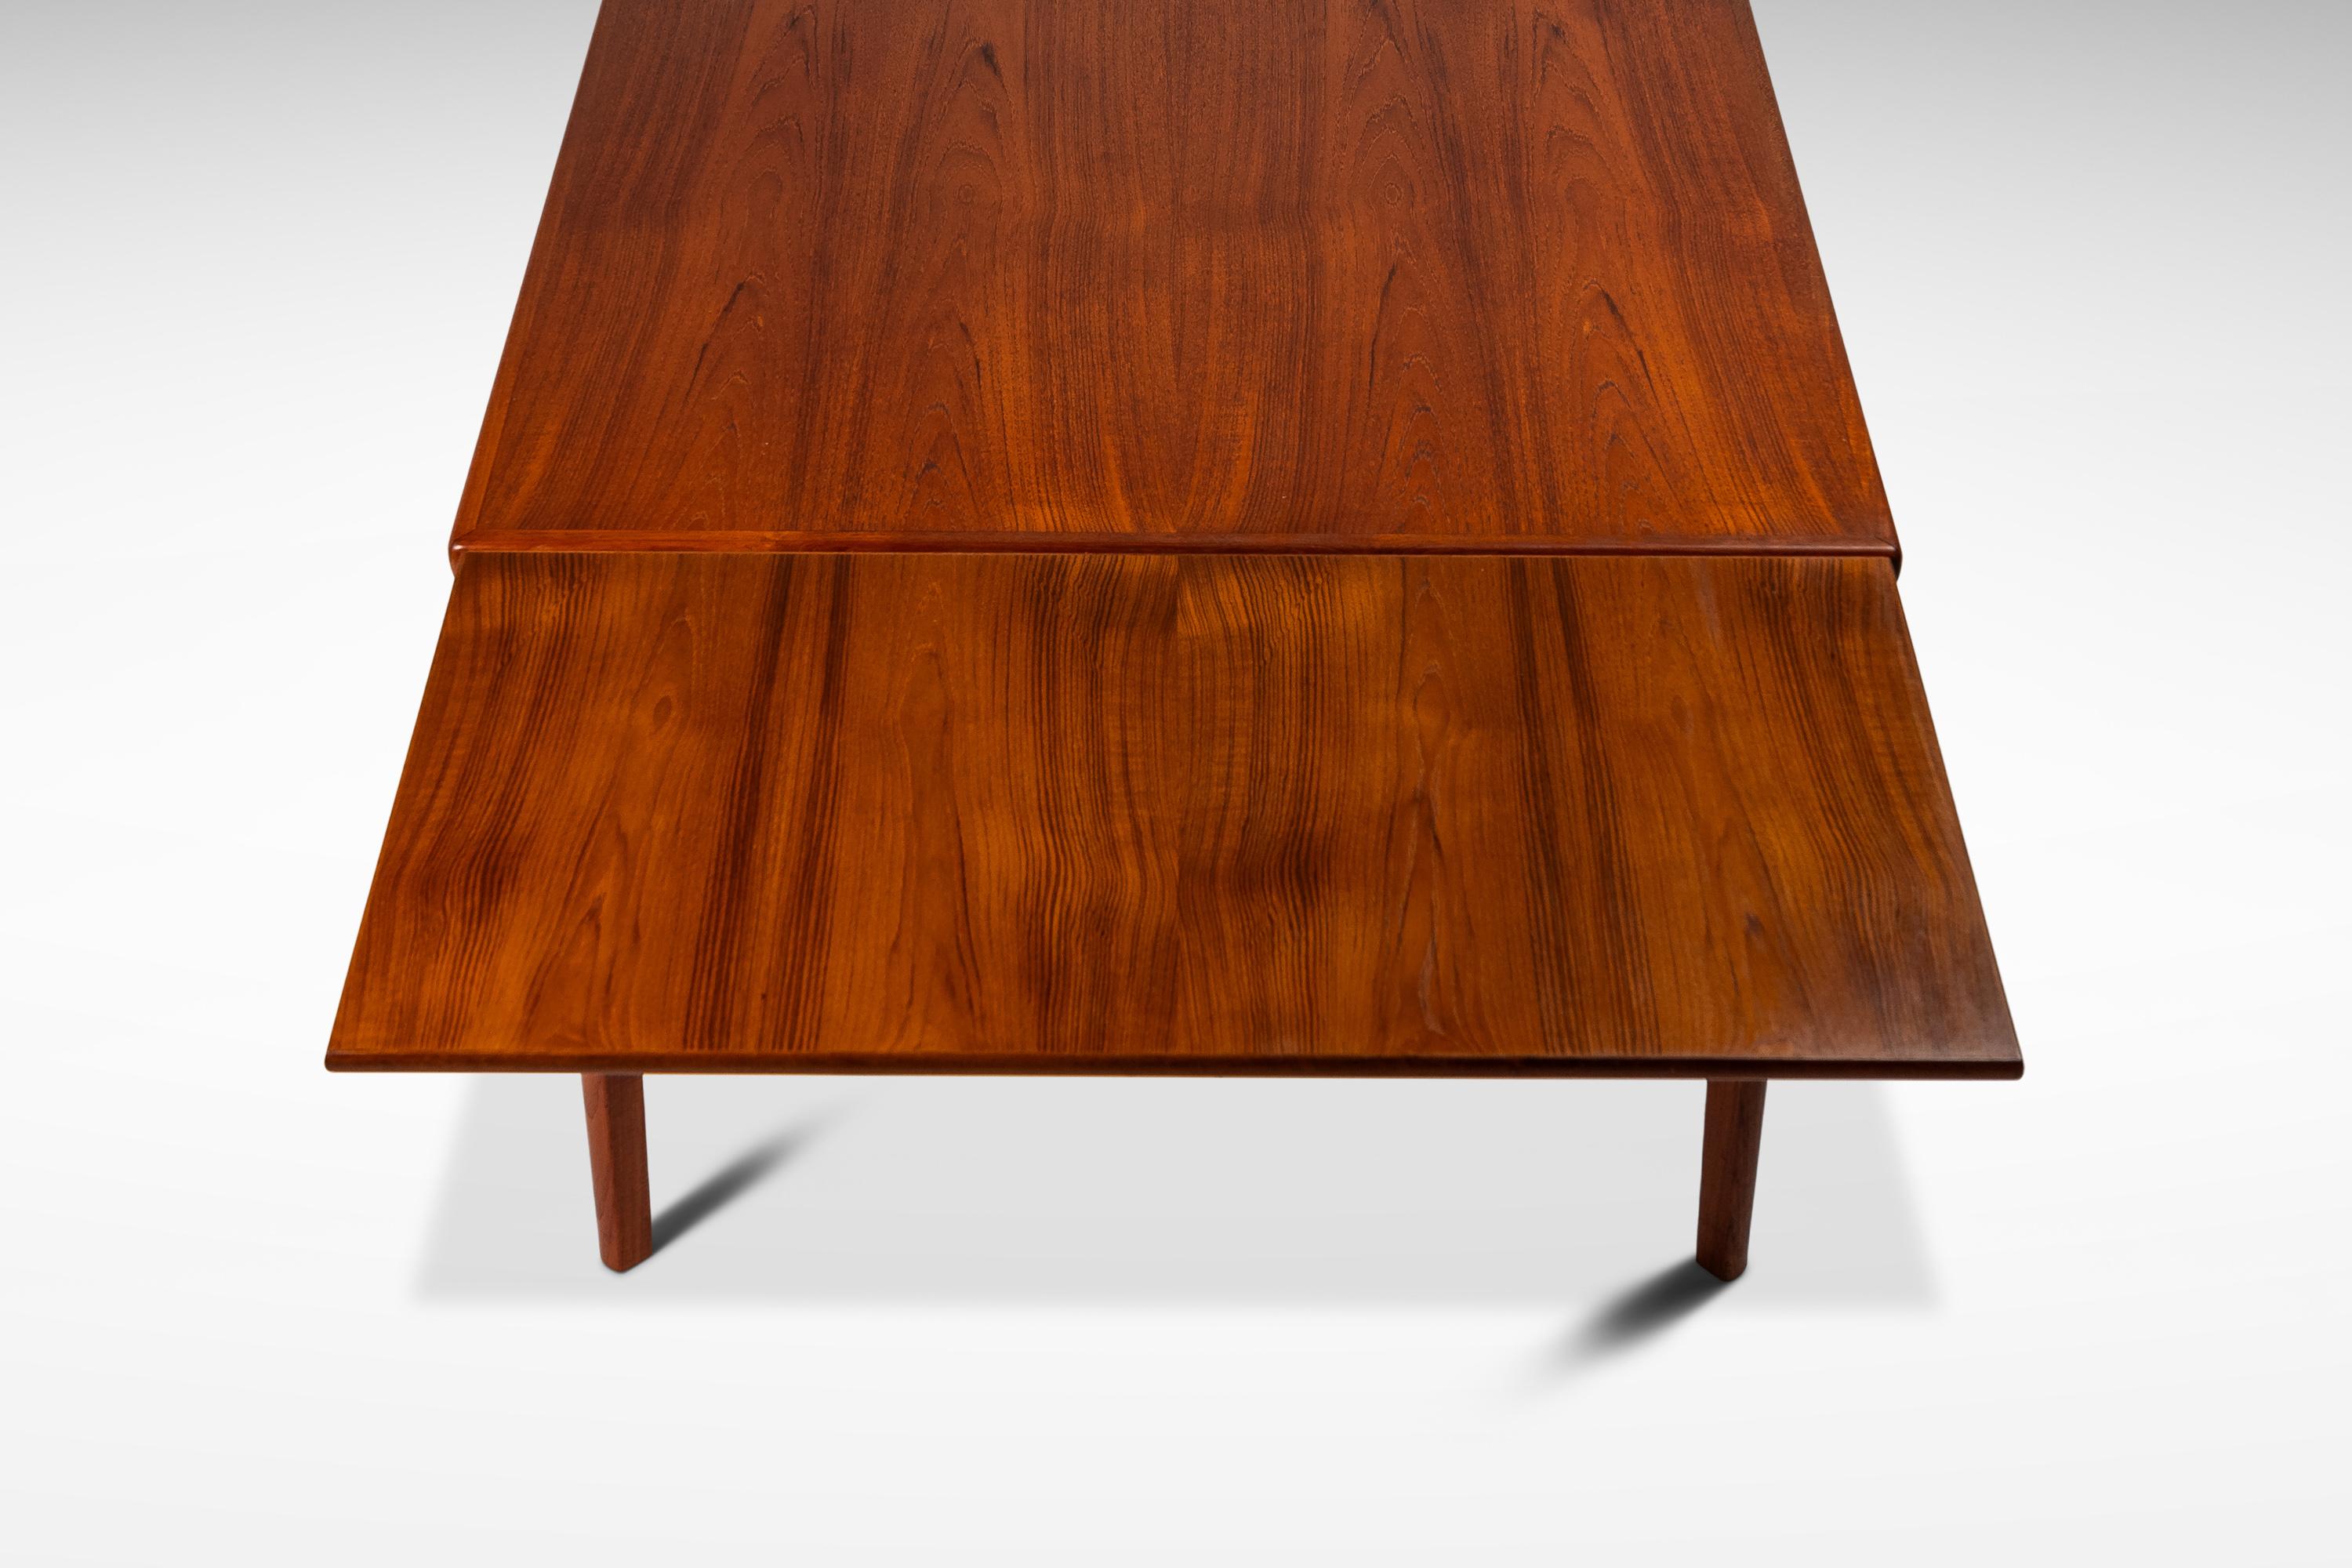 Teak Expansion Dining Table w/ Stow-in Leaves by BRDR Furbo, Denmark, c. 1960s For Sale 1